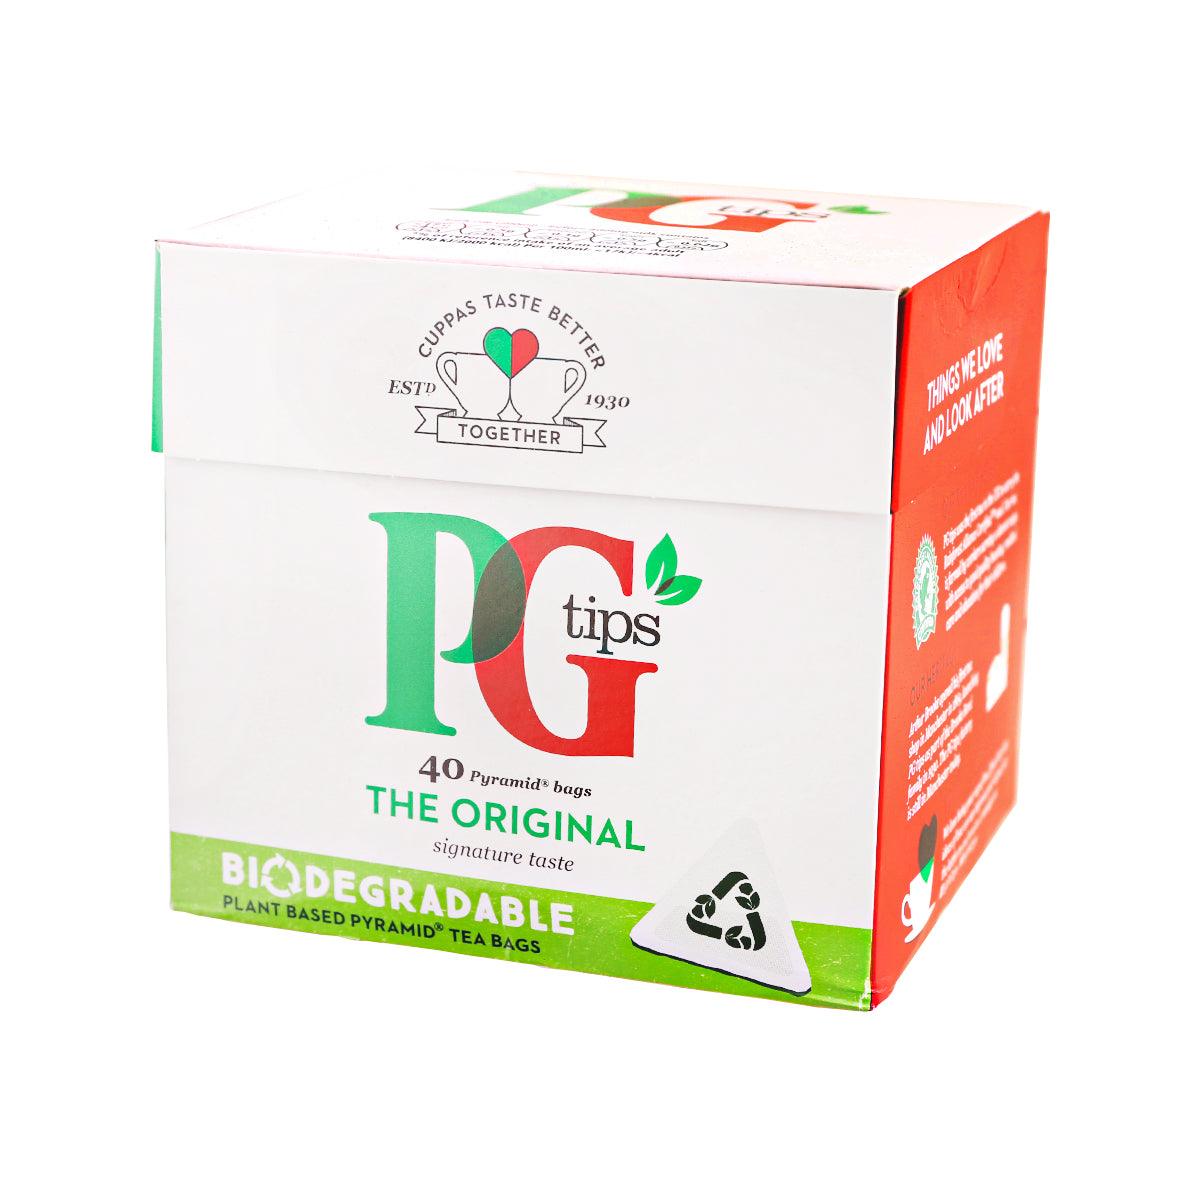 PG Tips Catering One Cup Pyramid Tea Bags (1100 Pack) | Turner Price